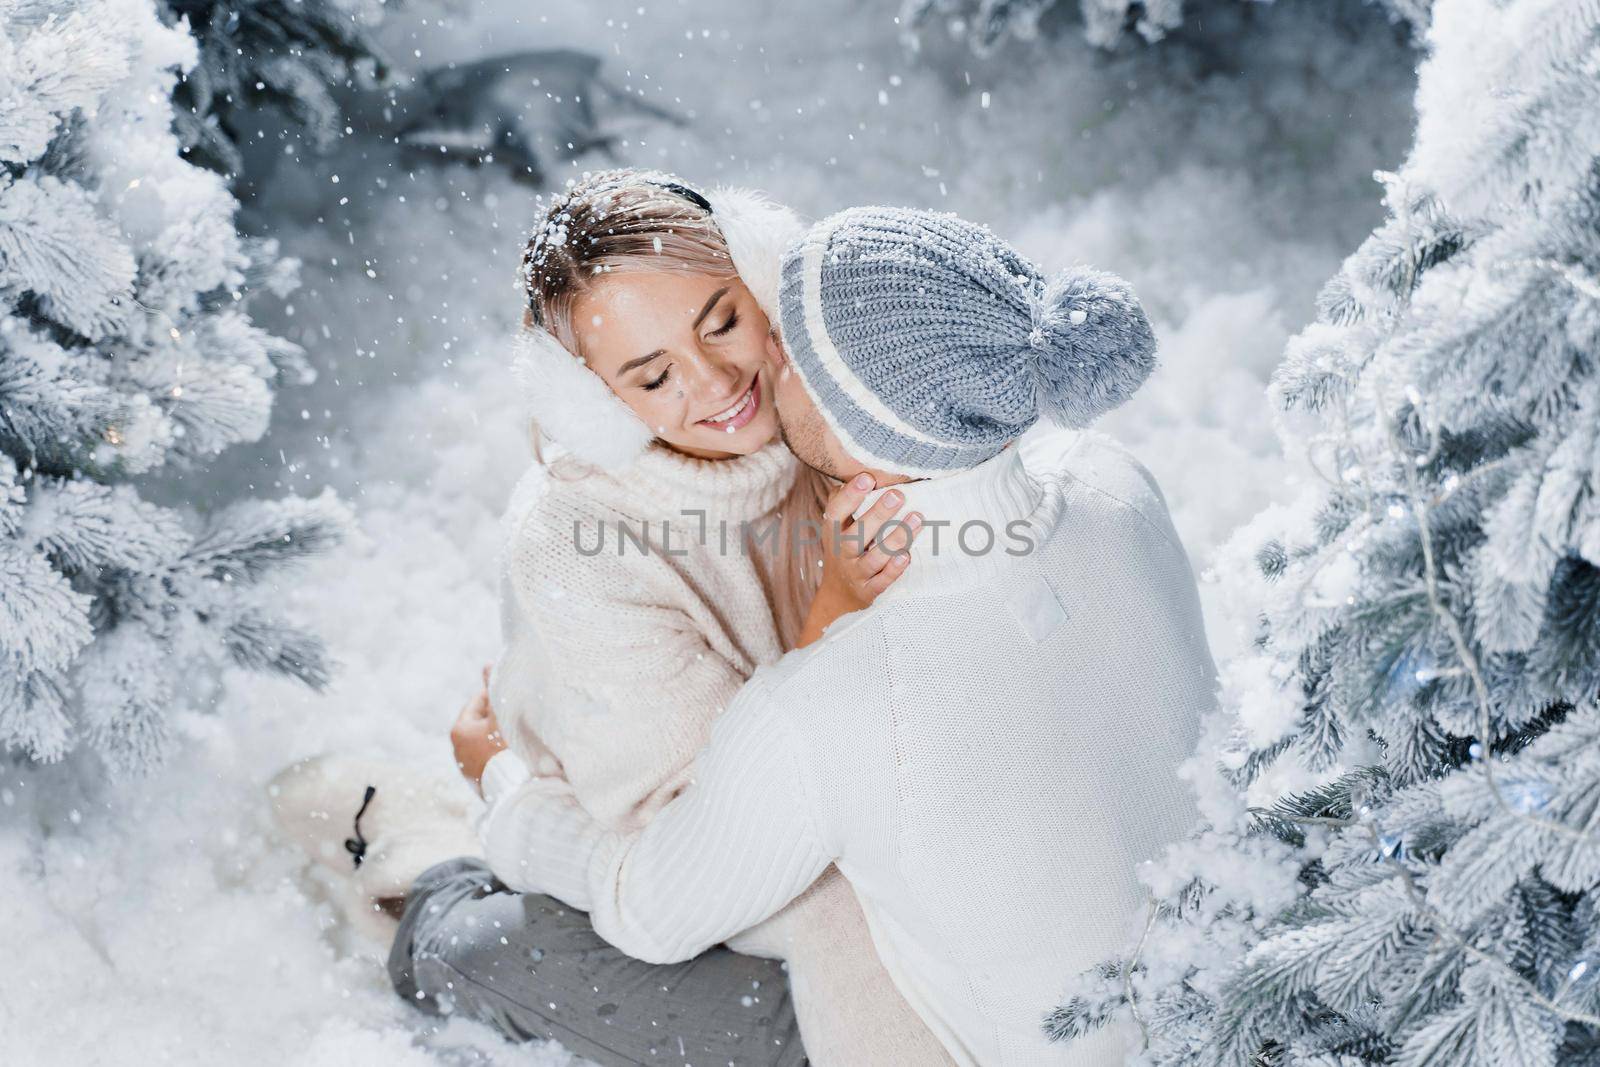 Man kiss and hug his woman and snow falls. New year love story. People weared wearing fur headphones, hats, white sweaters.